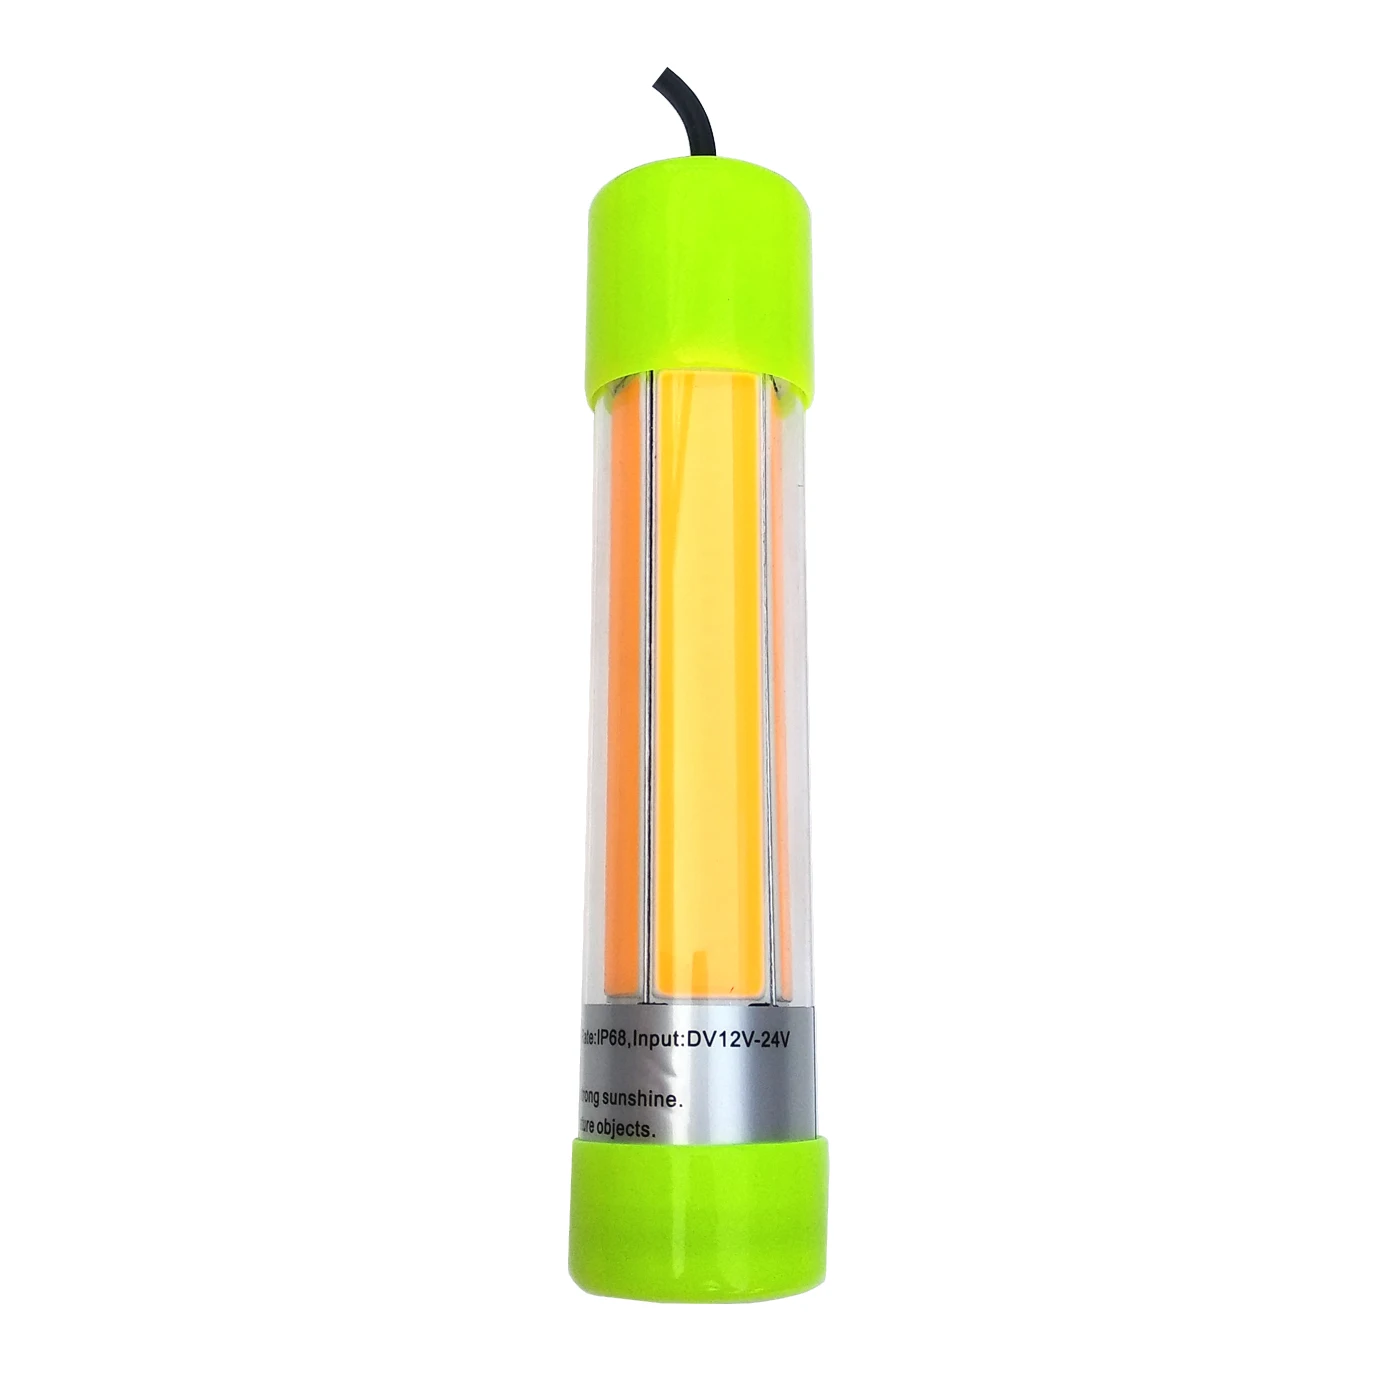 

12V 20W 60W LED Fishing Light Waterproof Ip68 Lures Fish Finder Lamp Attracts Prawns Squid Krill Underwater light